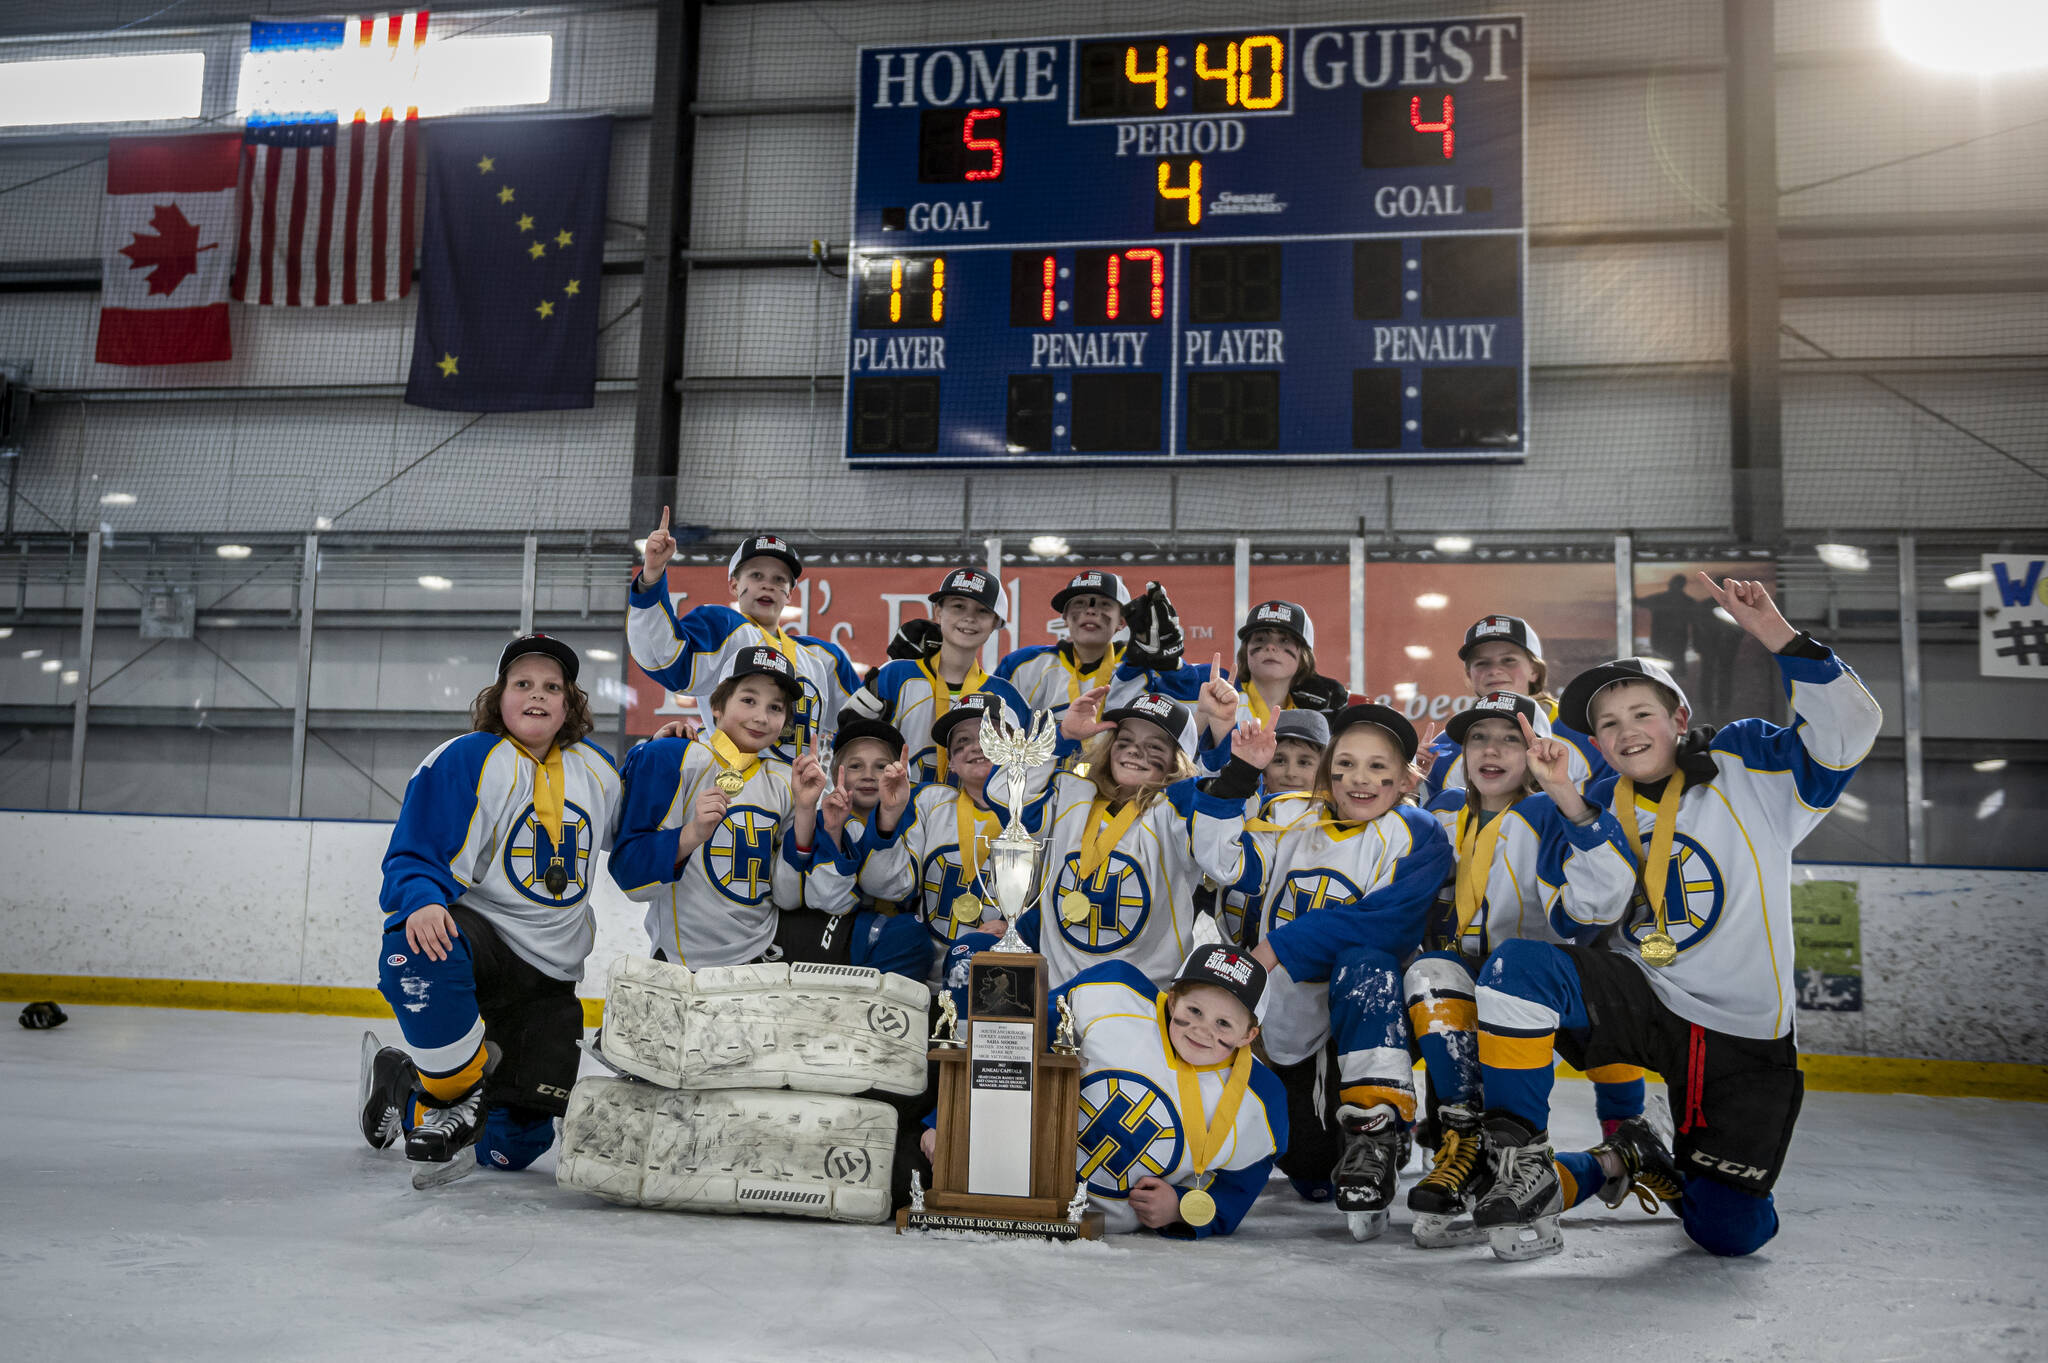 Photo by Scott Dickerson/courtesy
Homer Hockey Association for the 10 and under team take a division win in state tournament on Monday at the Kevin Bell Arena in Homer.